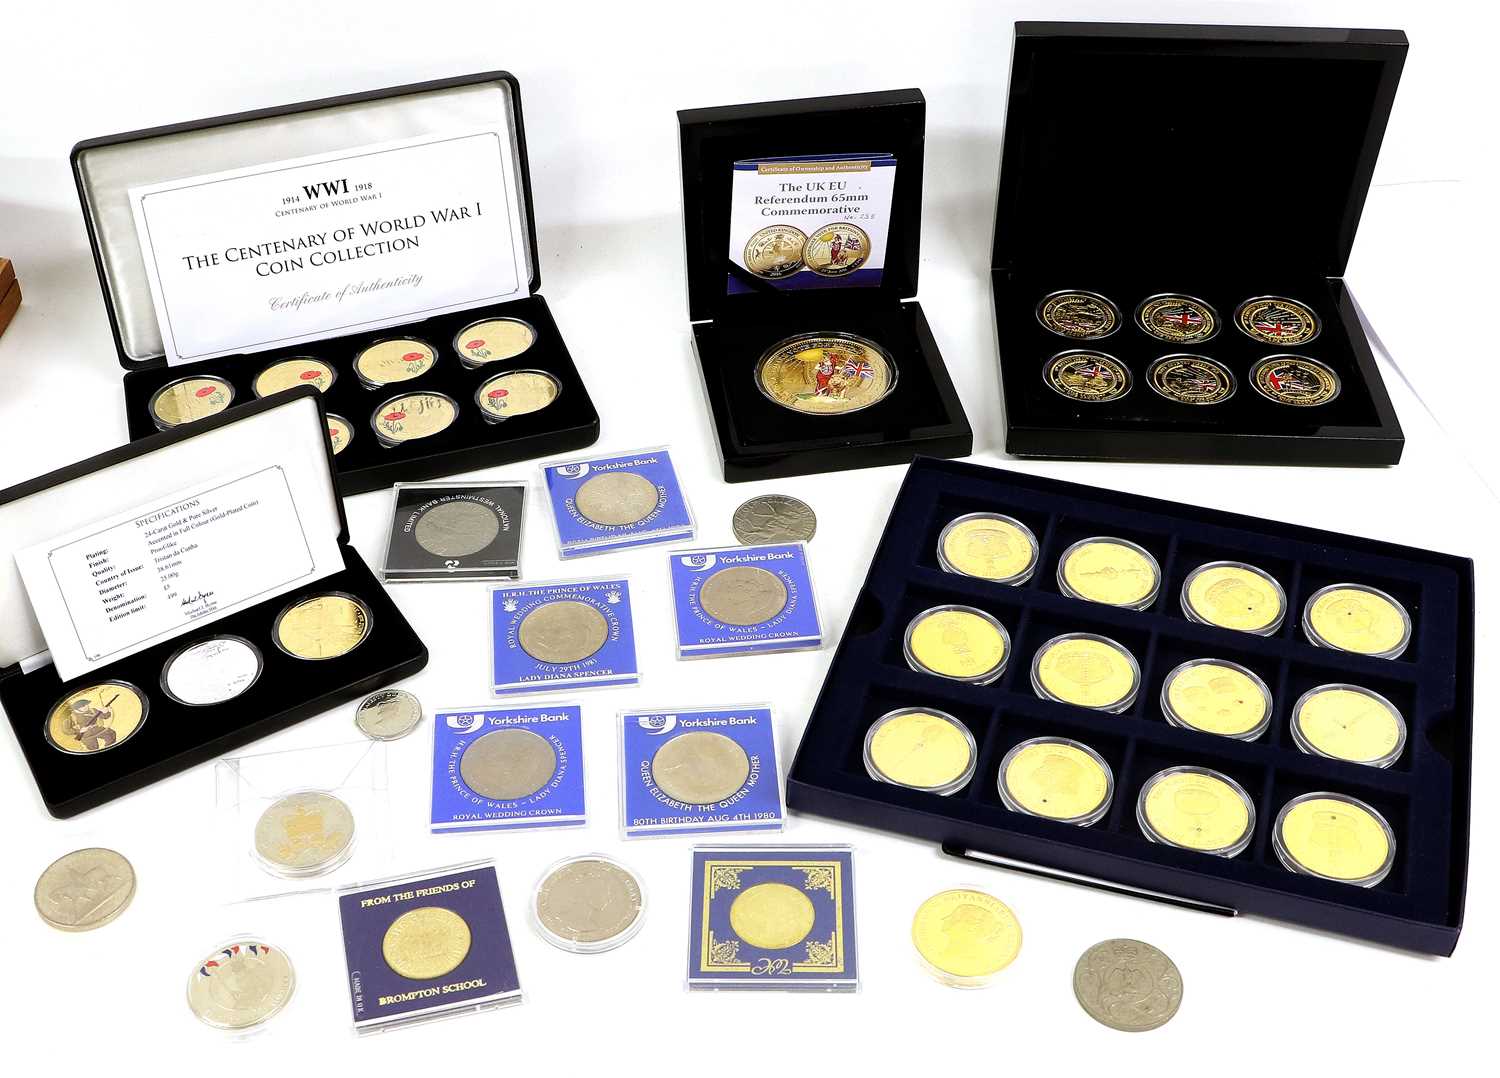 Mixed Lot of Commemorative Coinage; large mixed lot, numerous commemorative coins and sets, - Image 3 of 6